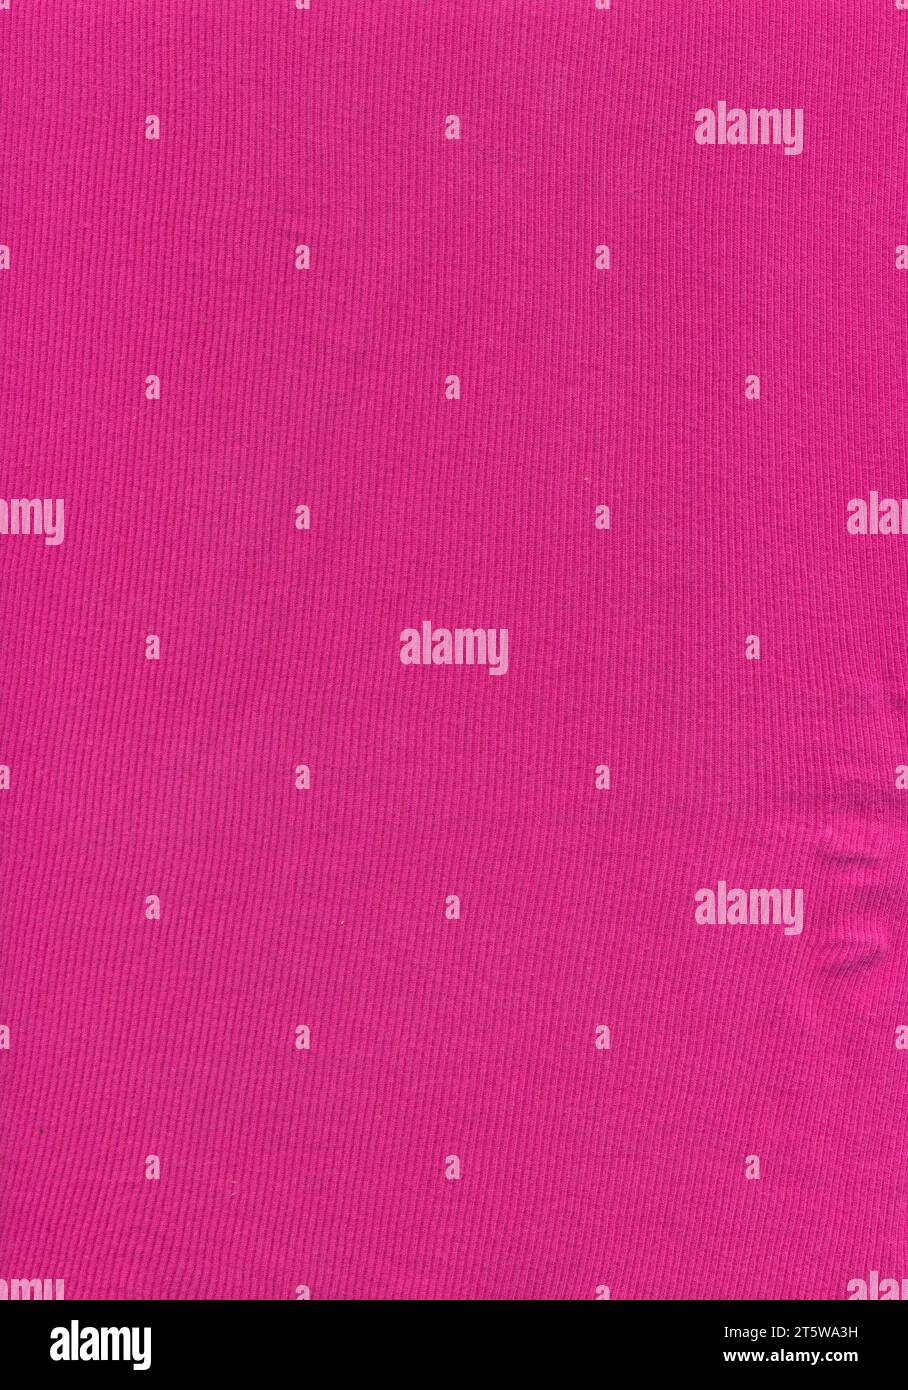 High detailed cotton fabric of rich pink color. Stock Photo